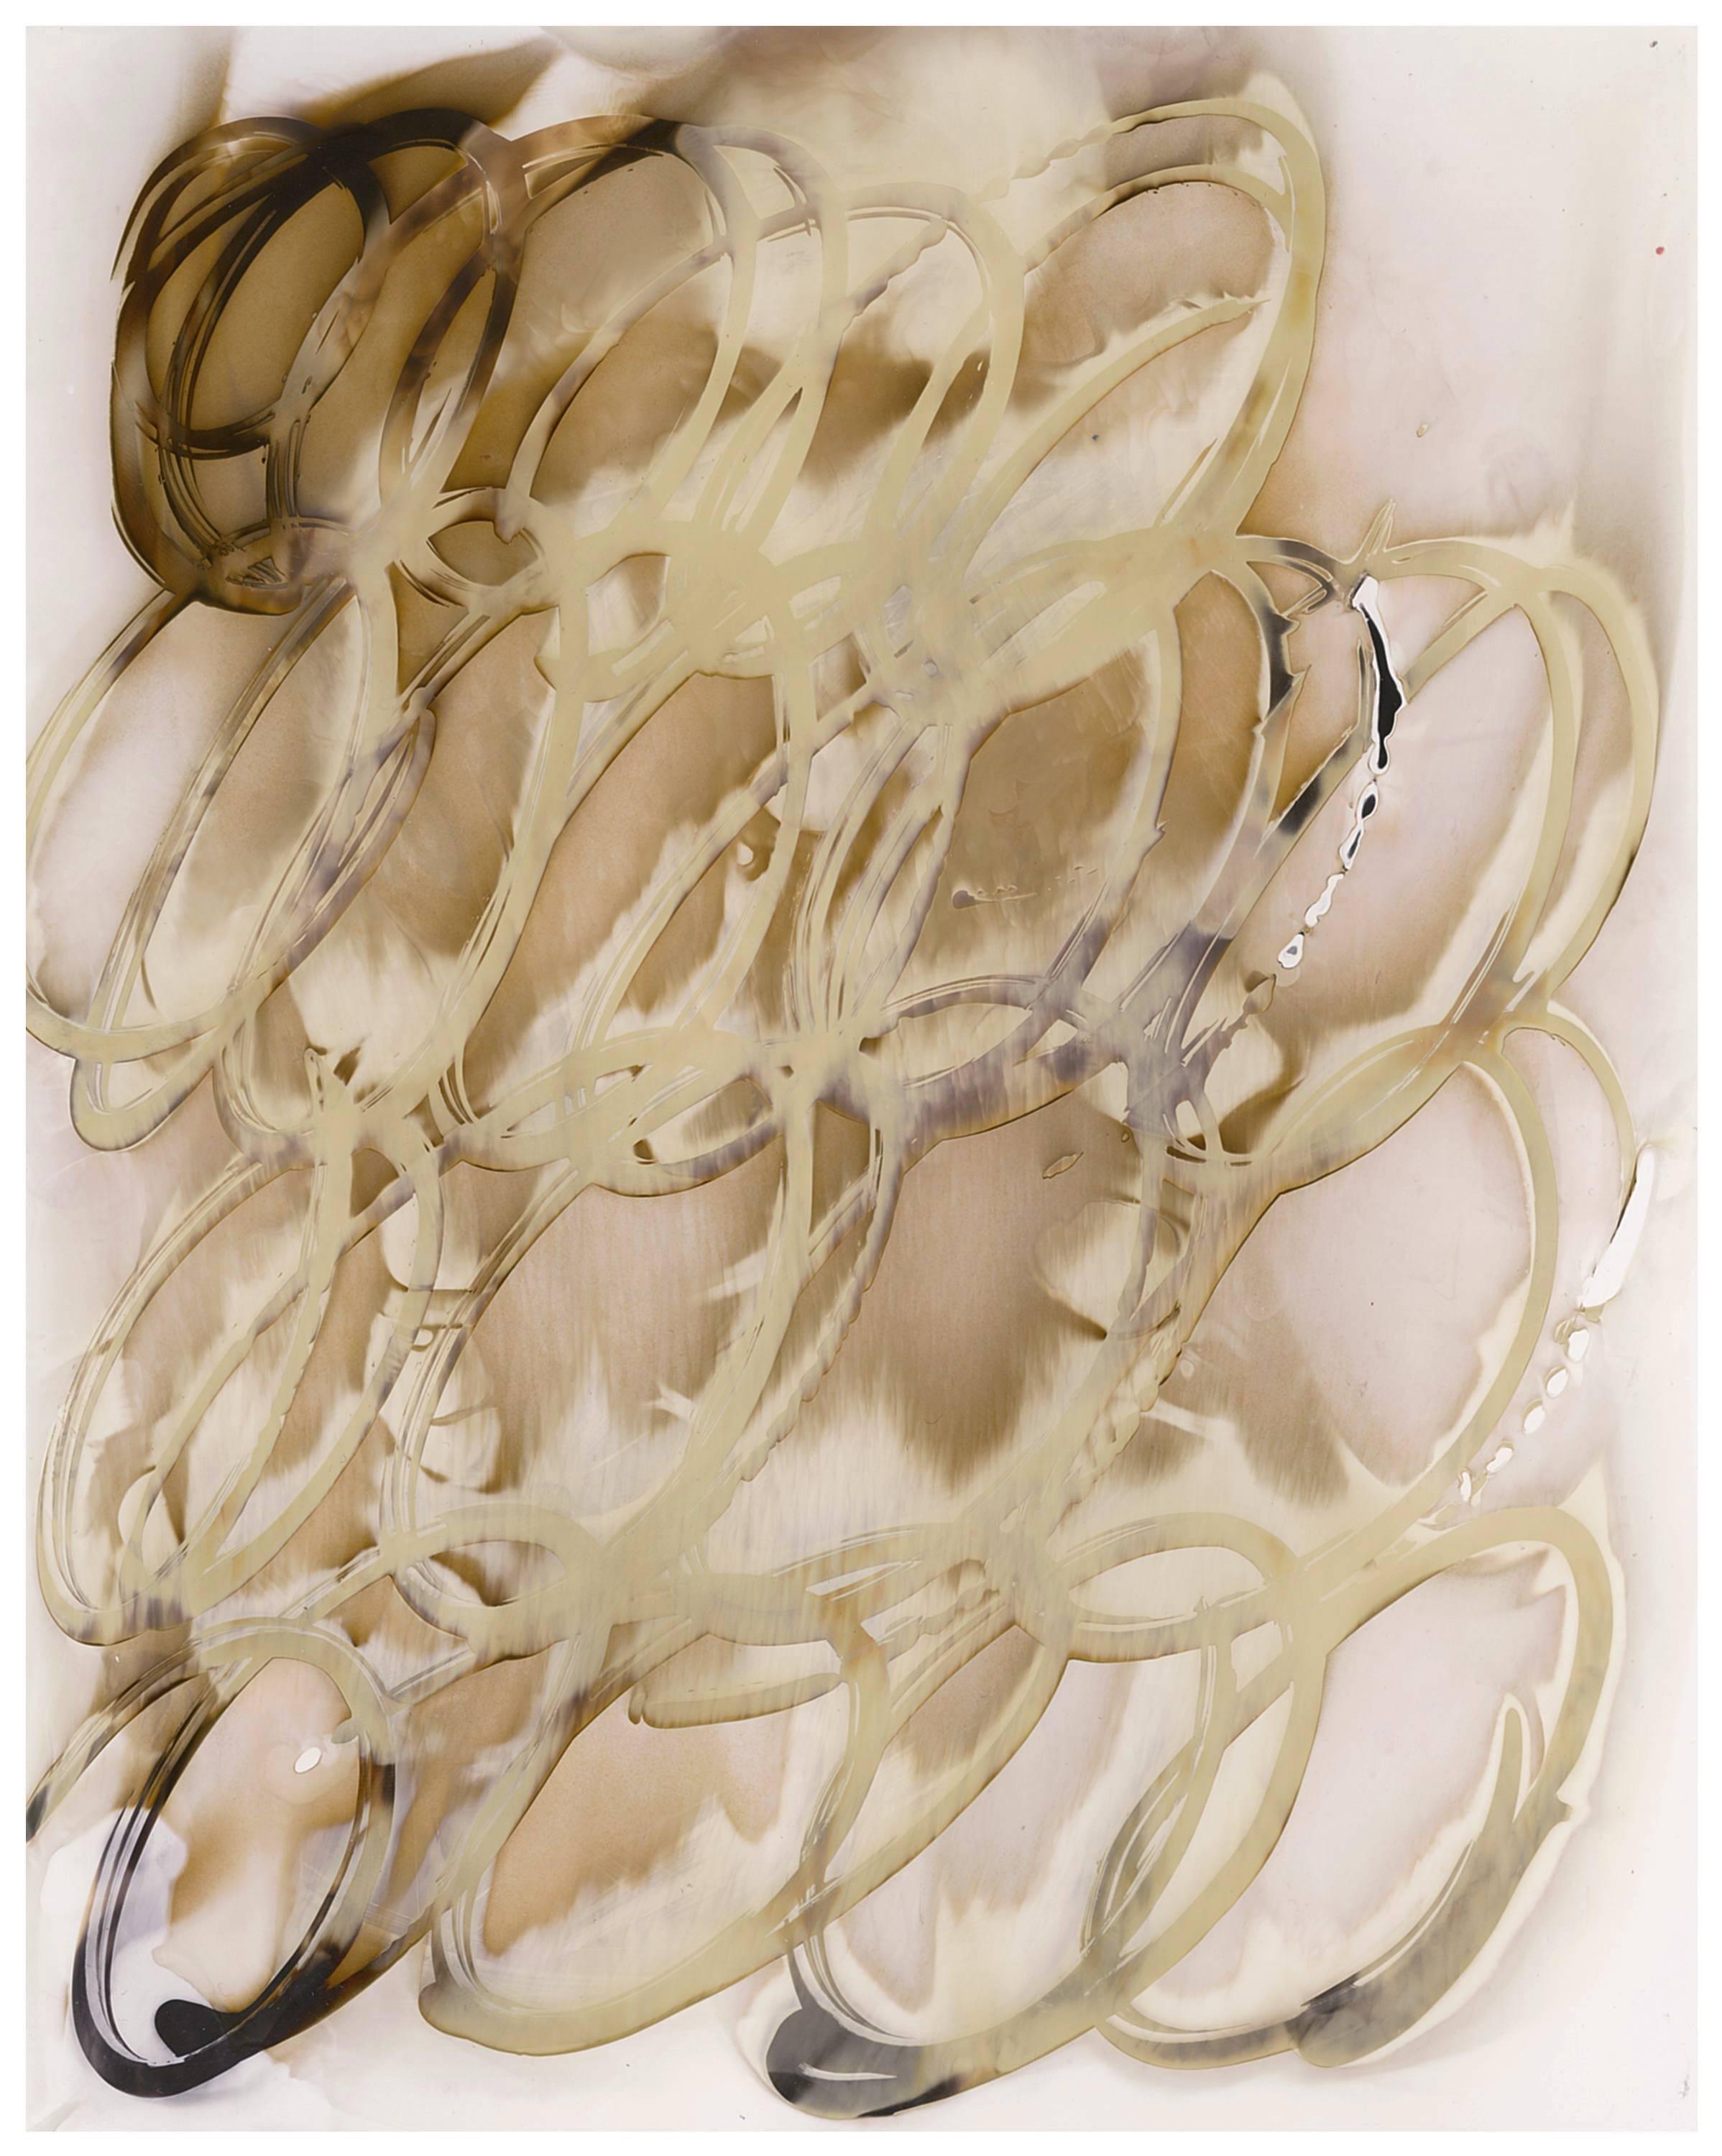 Birgit Blyth Abstract Photograph - In Memory Of #3 (Modern, Abstract Chromoskedasic Photo in Light Brown & Beige)